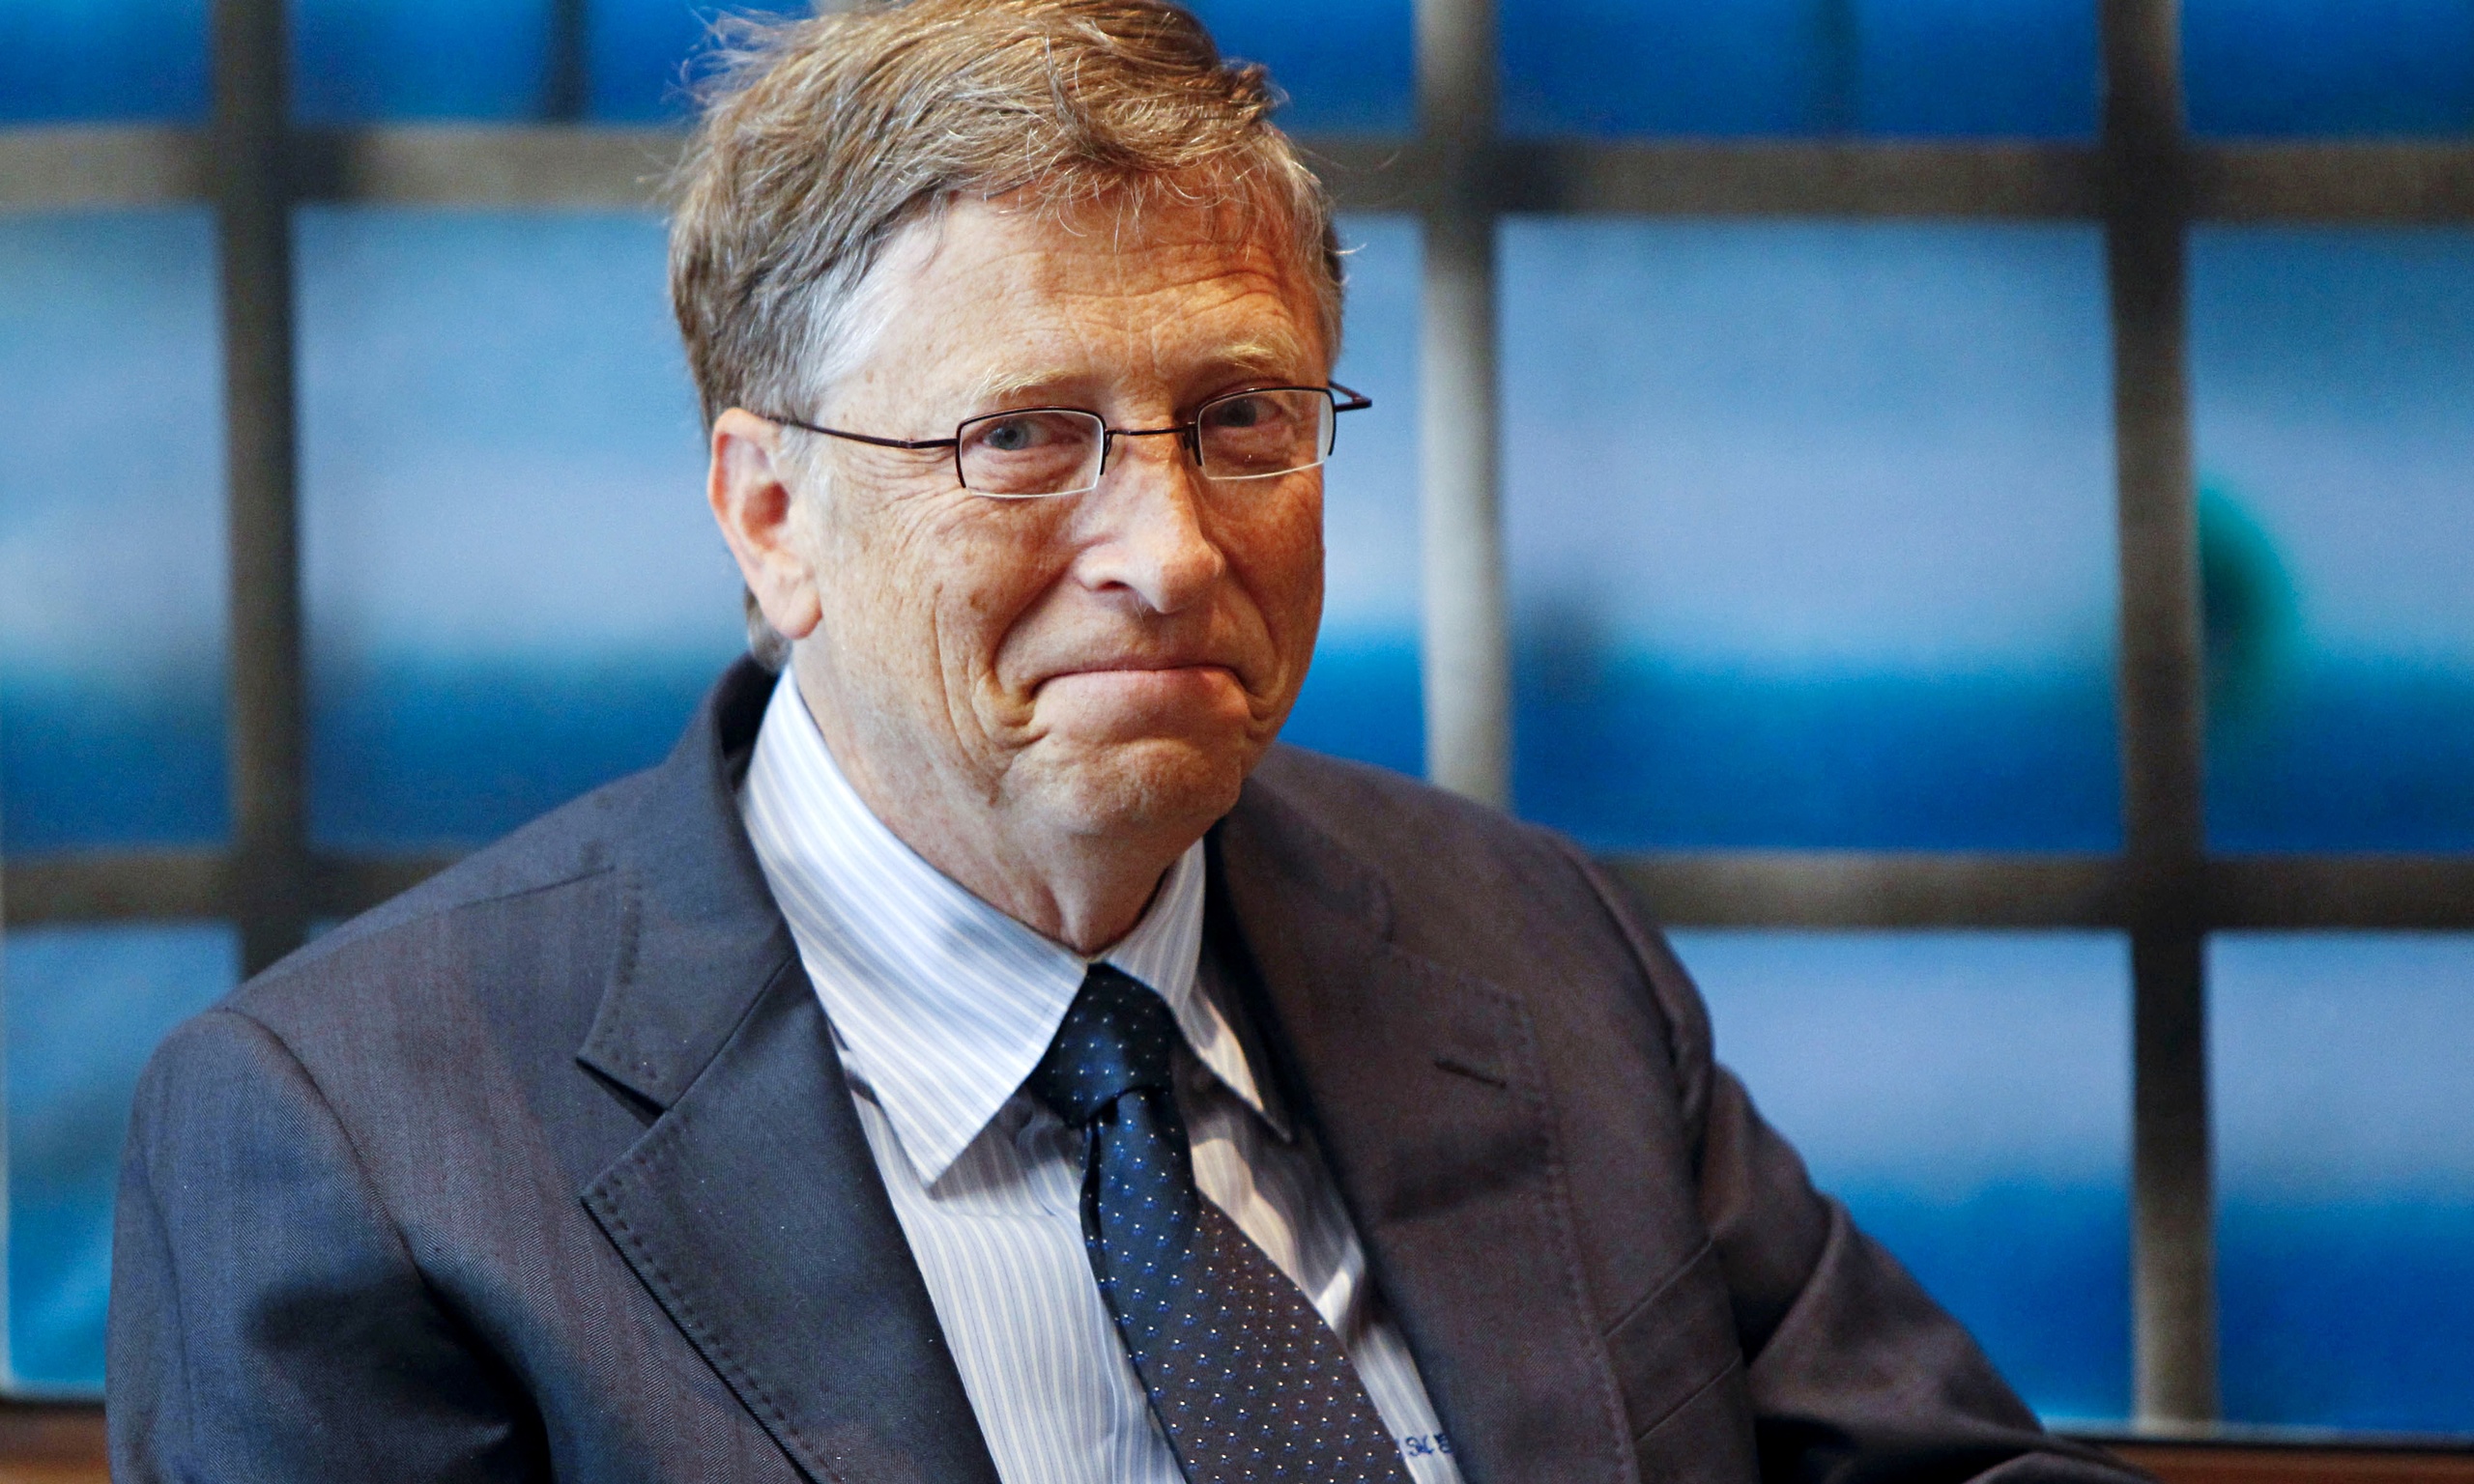 Bill Gates creates instant book hit by revealing favourite business